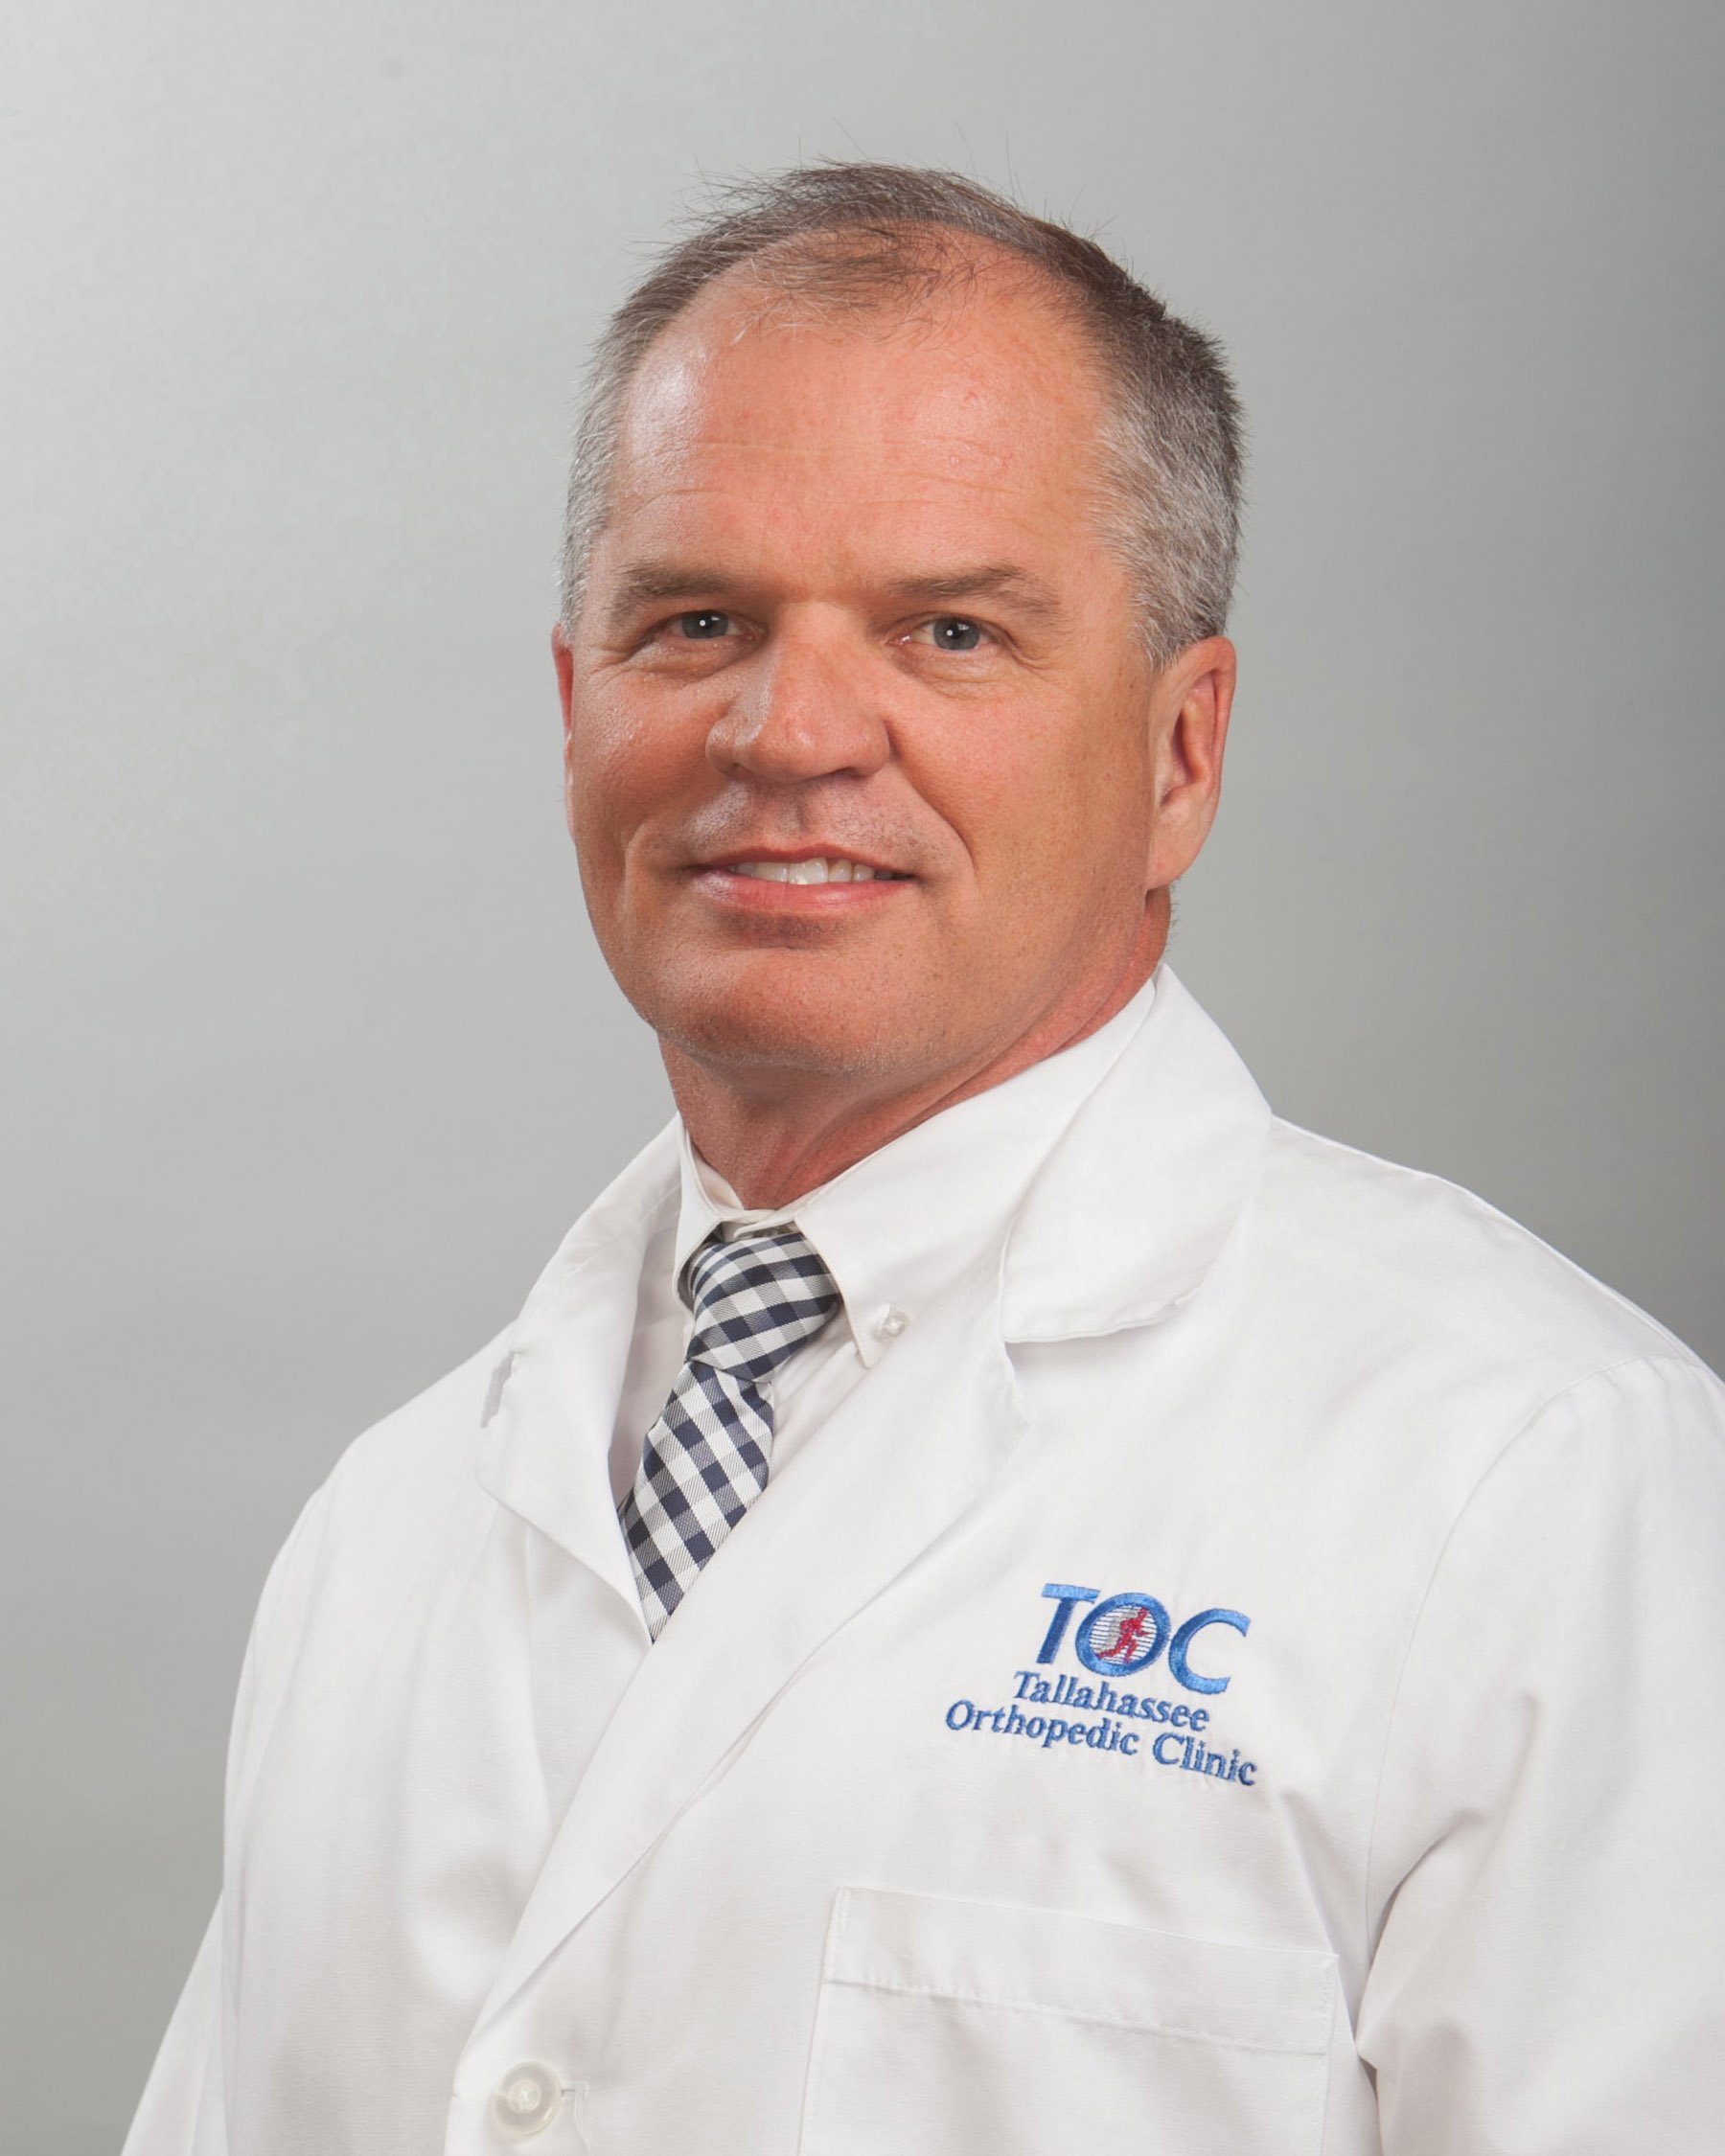 Kris D. Stowers, MD